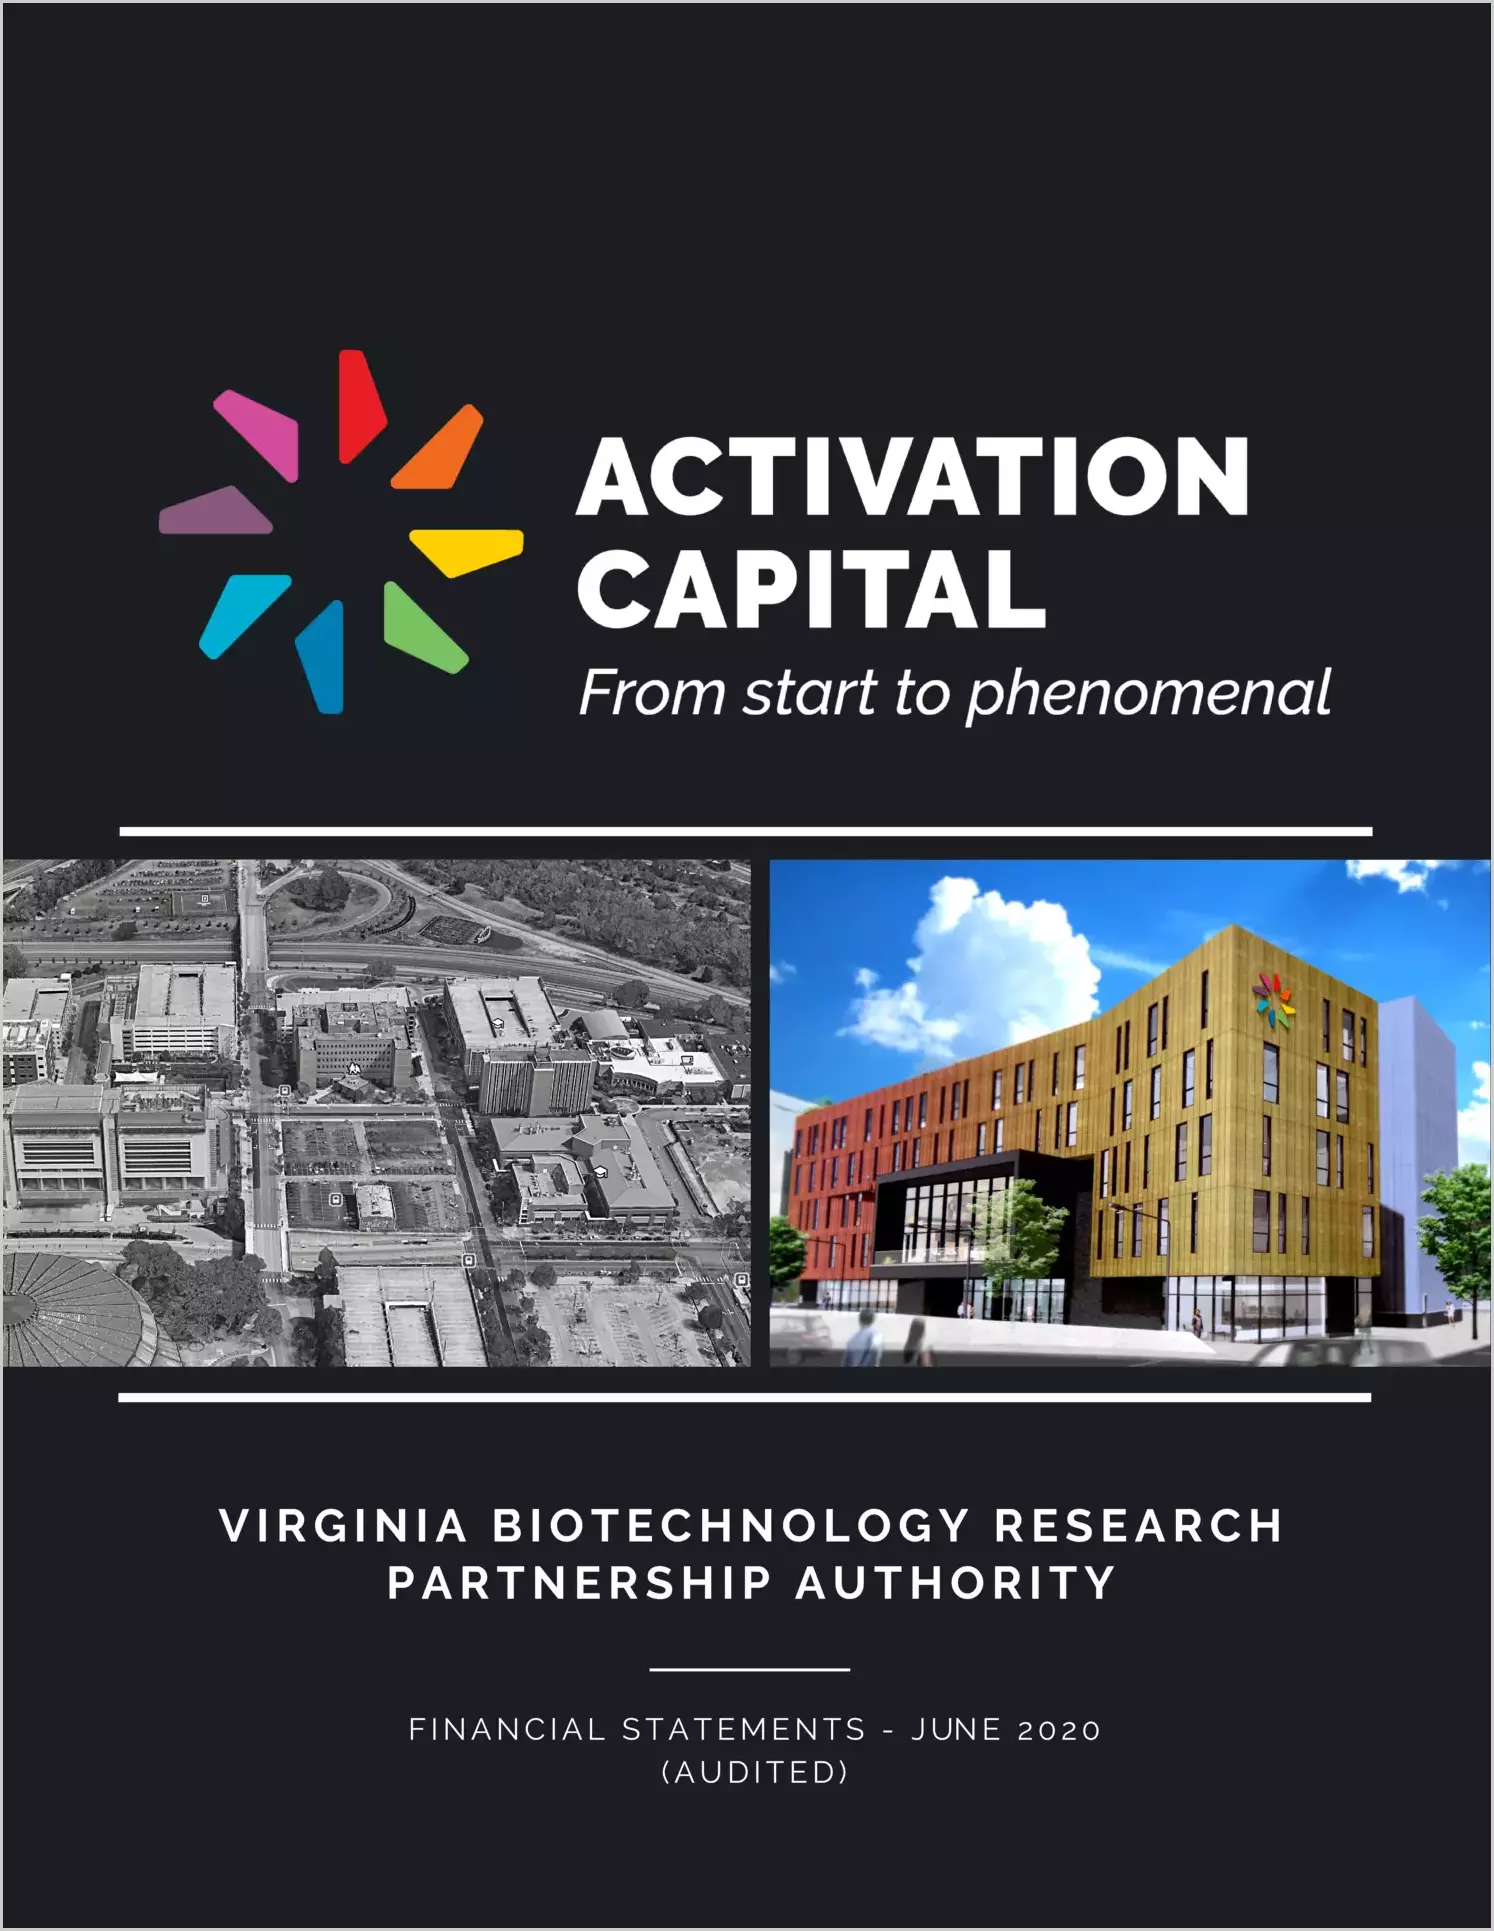 Virginia Biotechnology Research Partnership Authority Financial Statements for the year ended June 30, 2020